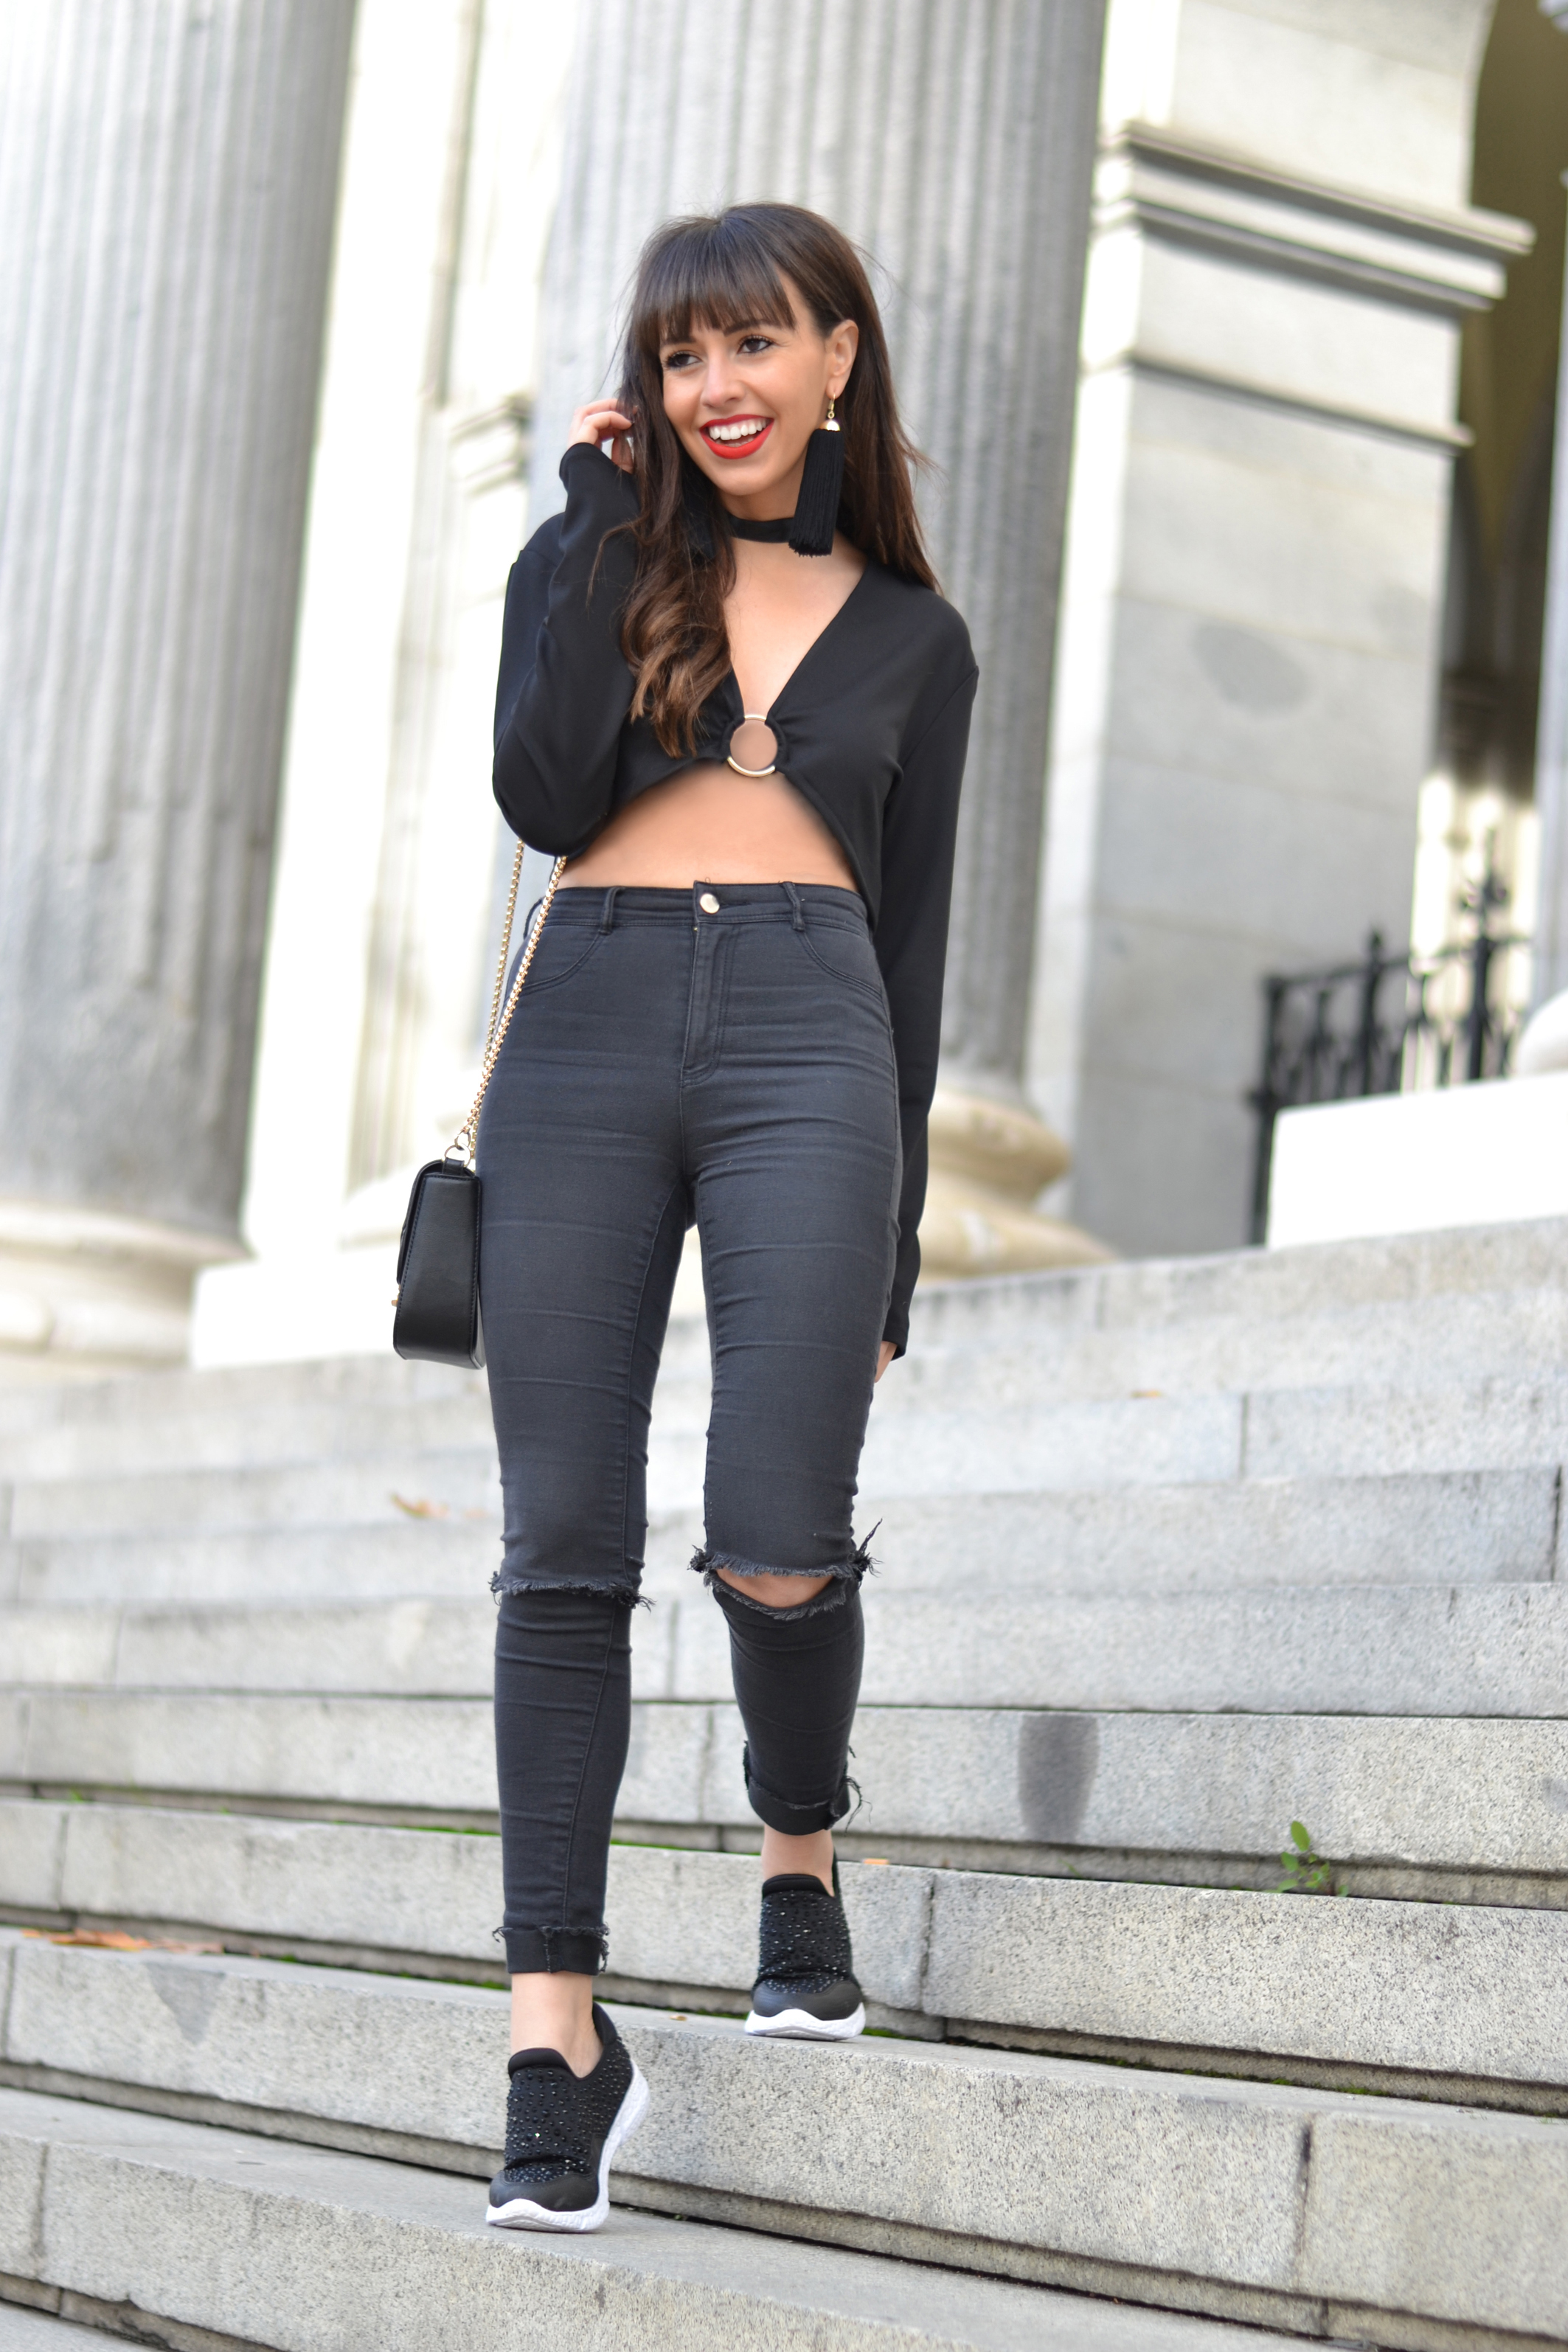 BLACK CROP TOP OUTFIT IDEAS WITH JEWELED SNEAKERS